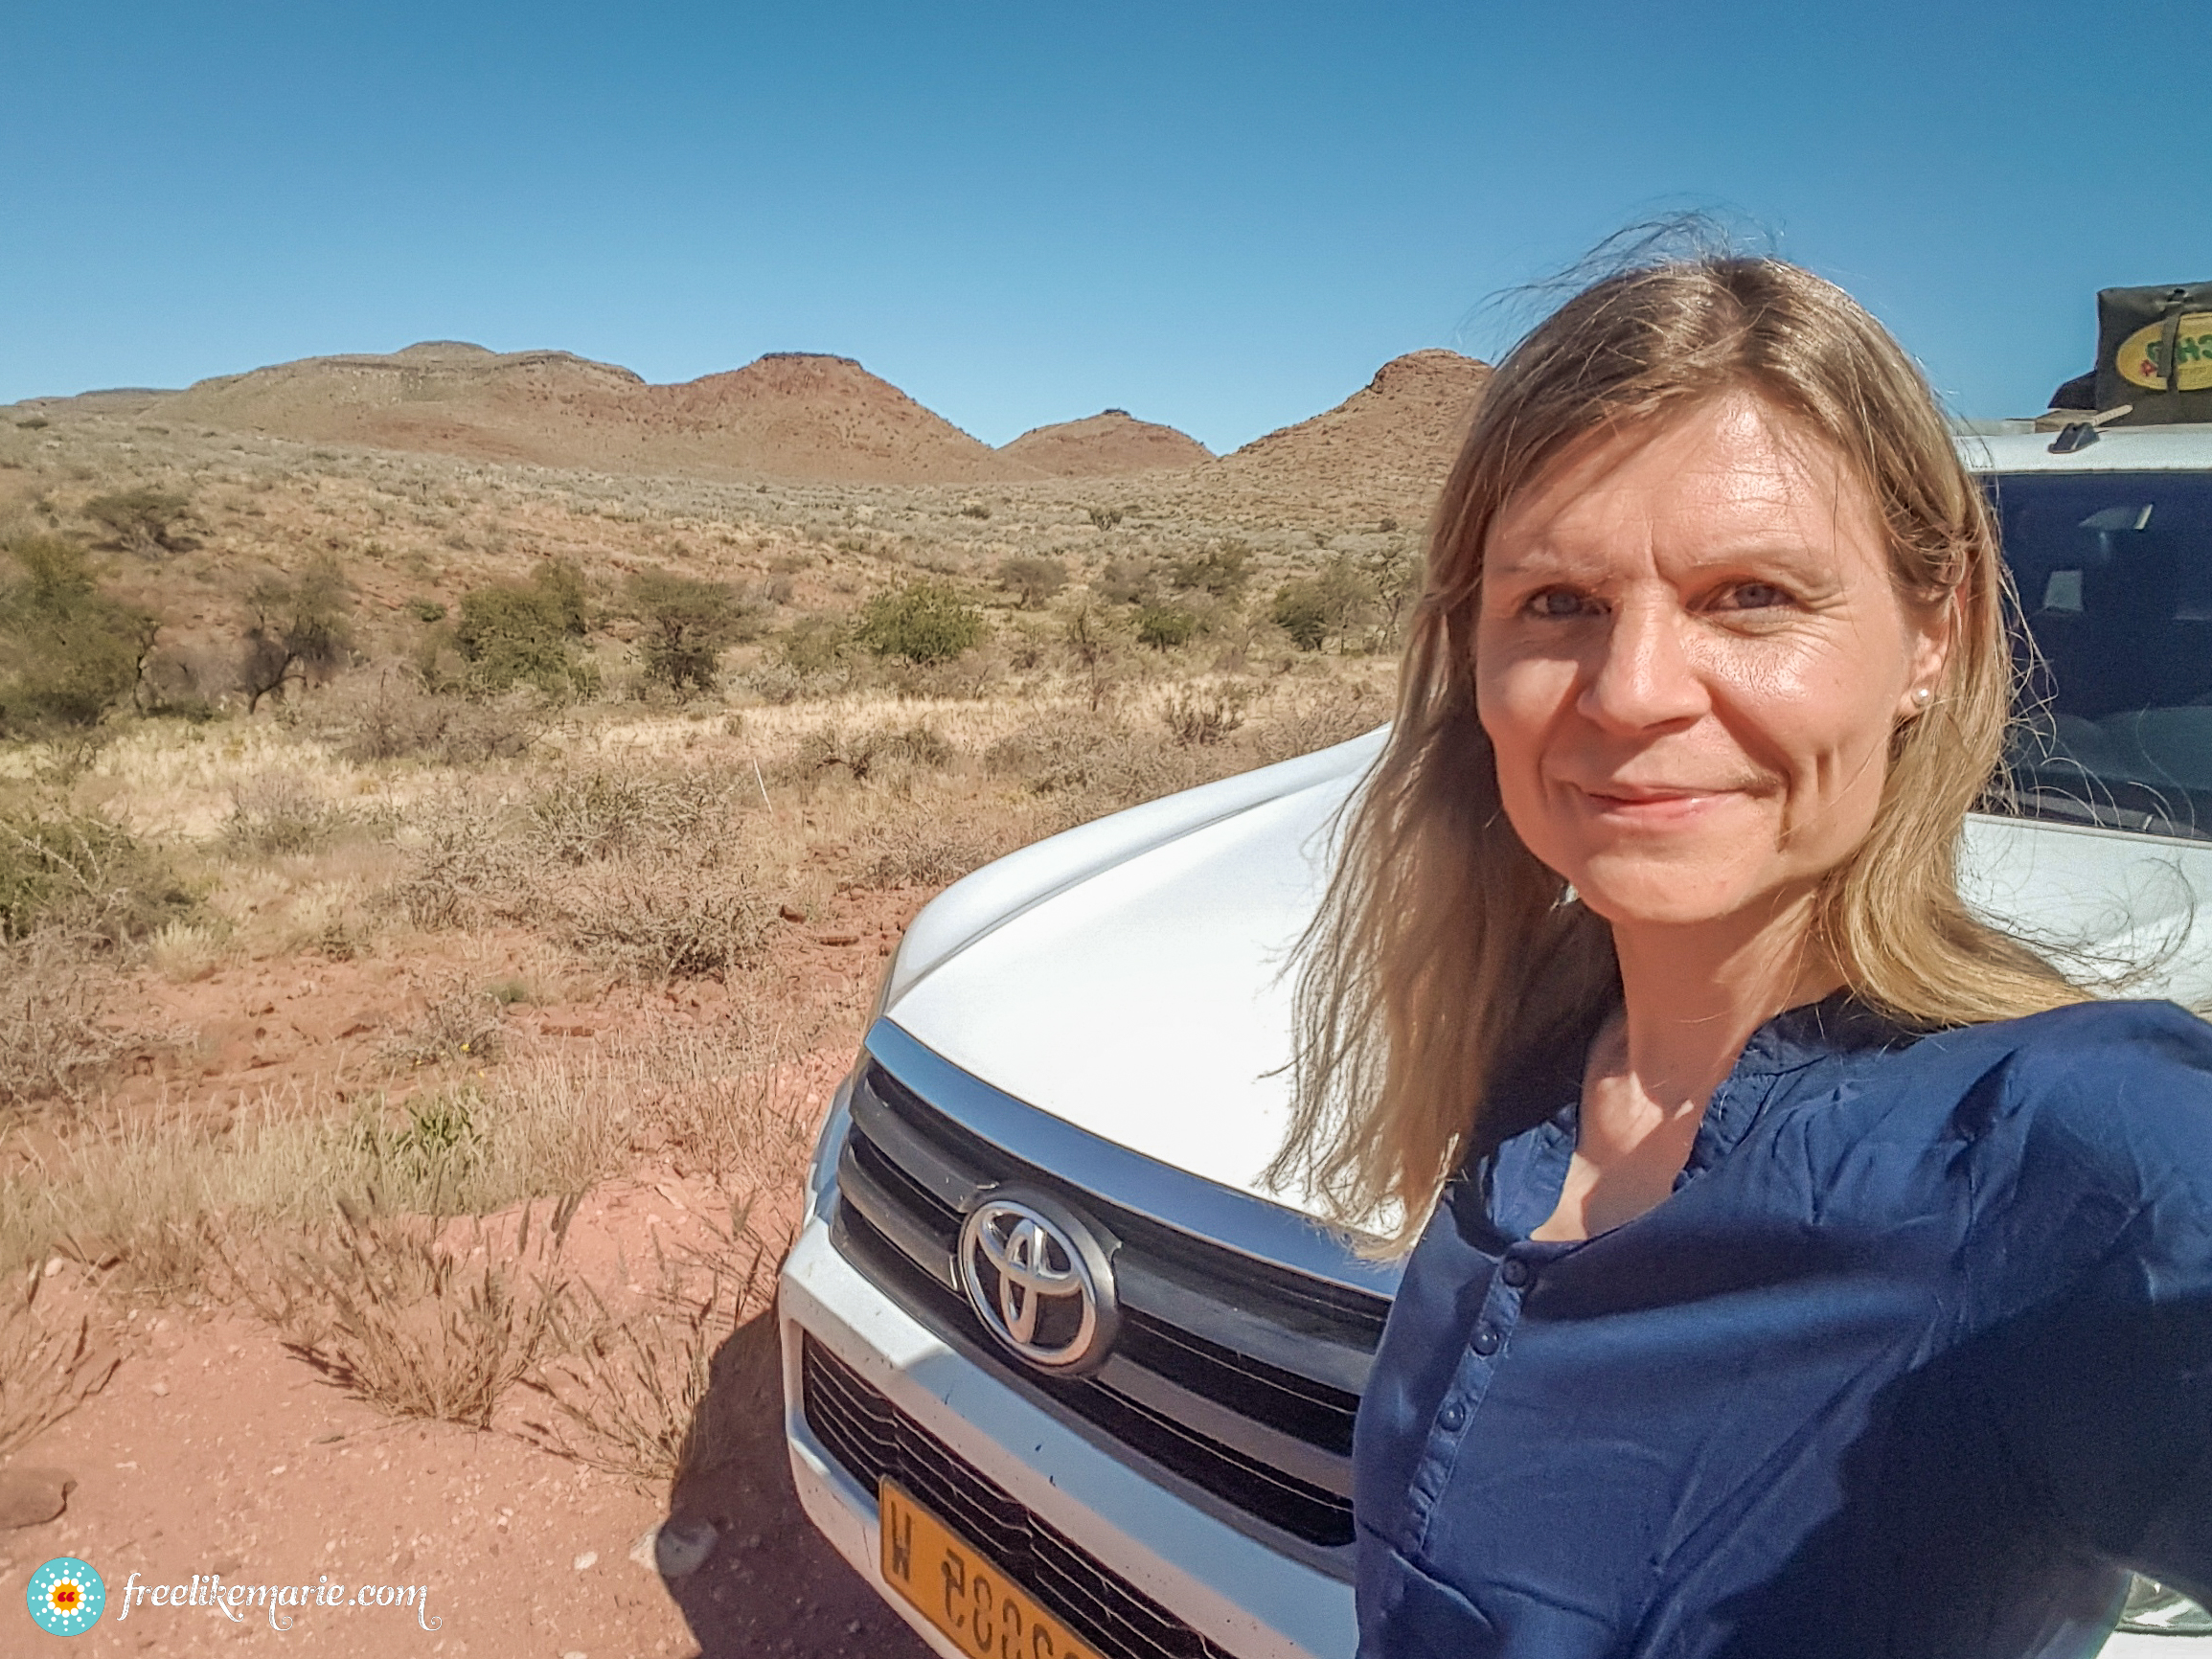 Marie in Namibia